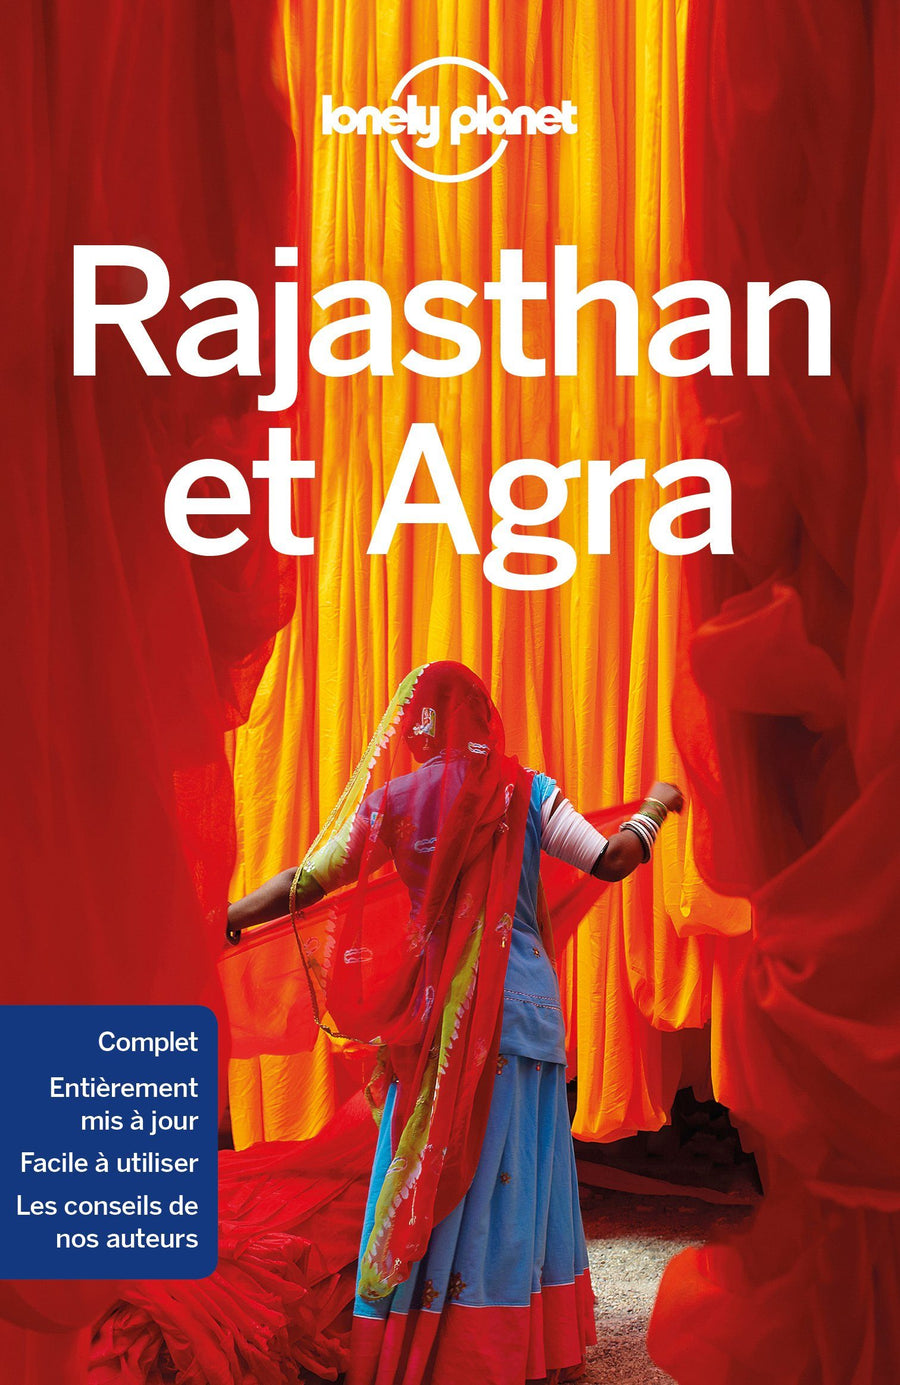 Guide de voyage - Rajasthan & Agra - Édition 2020 | Lonely Planet guide de voyage Lonely Planet 